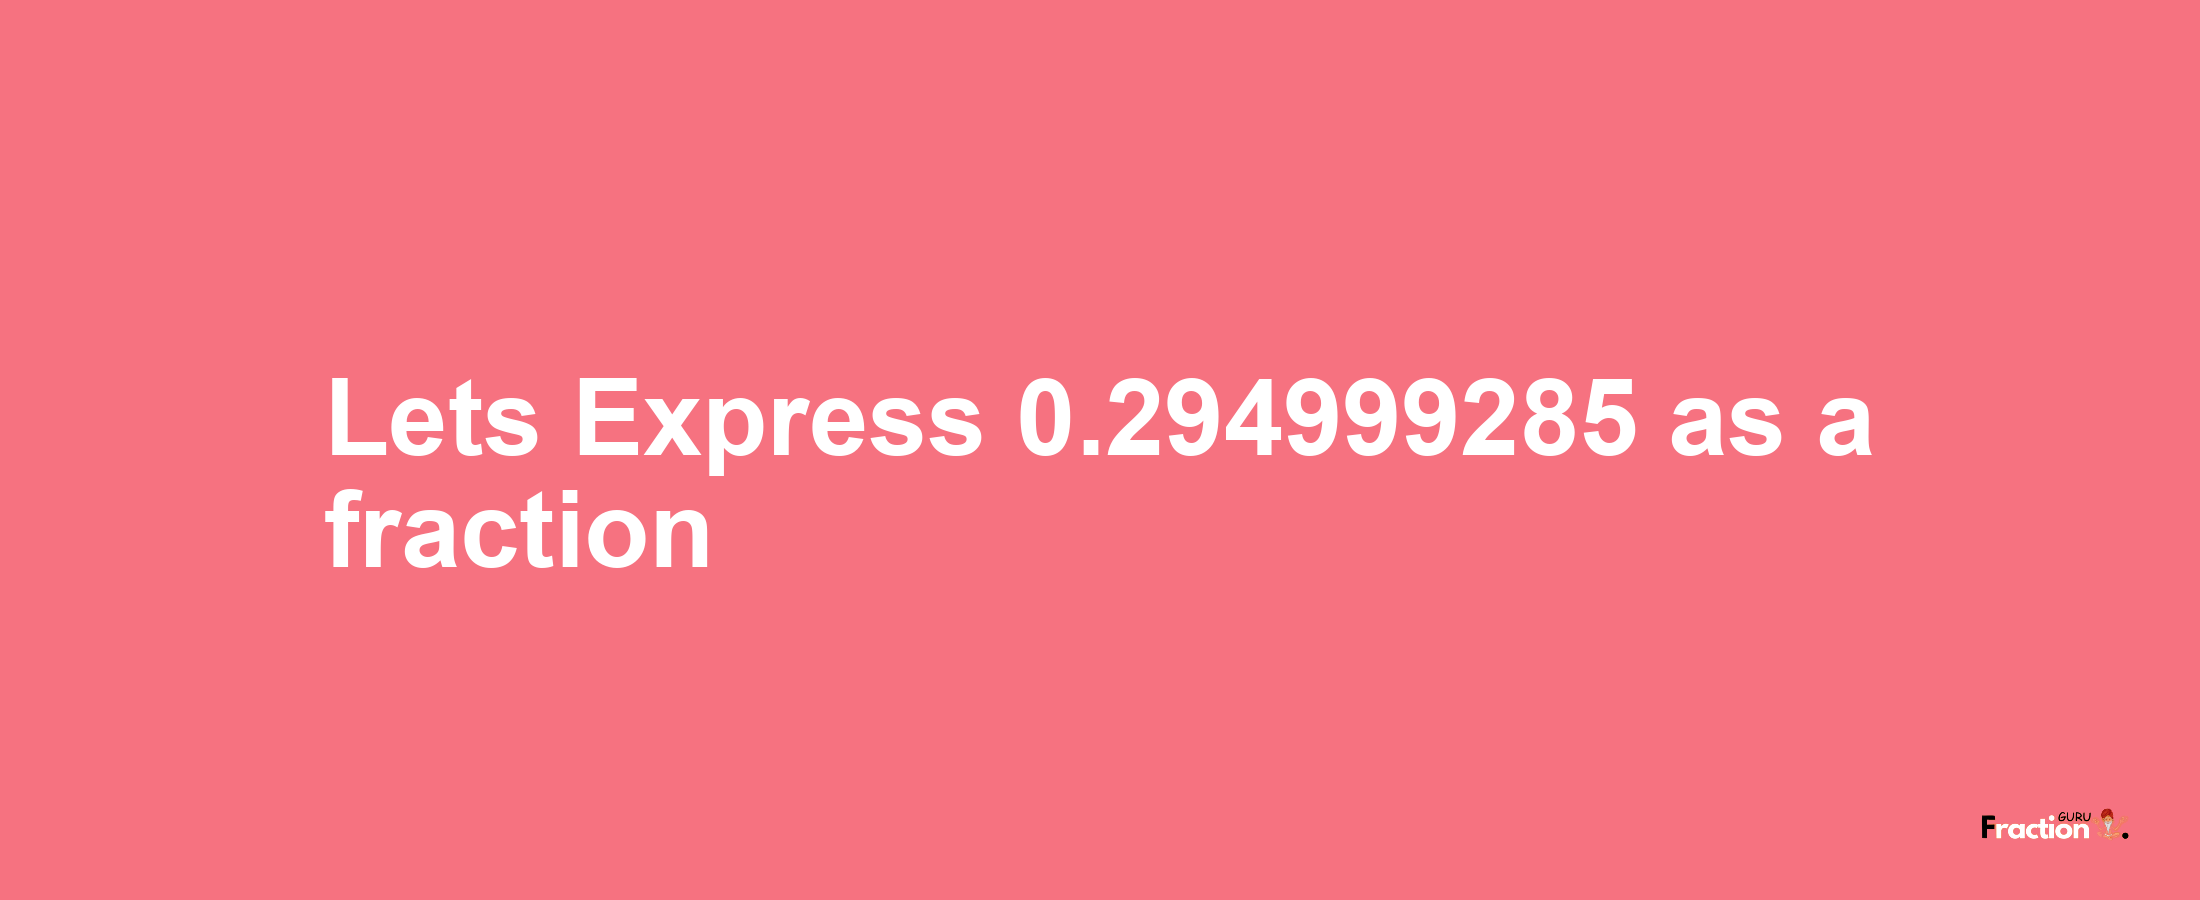 Lets Express 0.294999285 as afraction